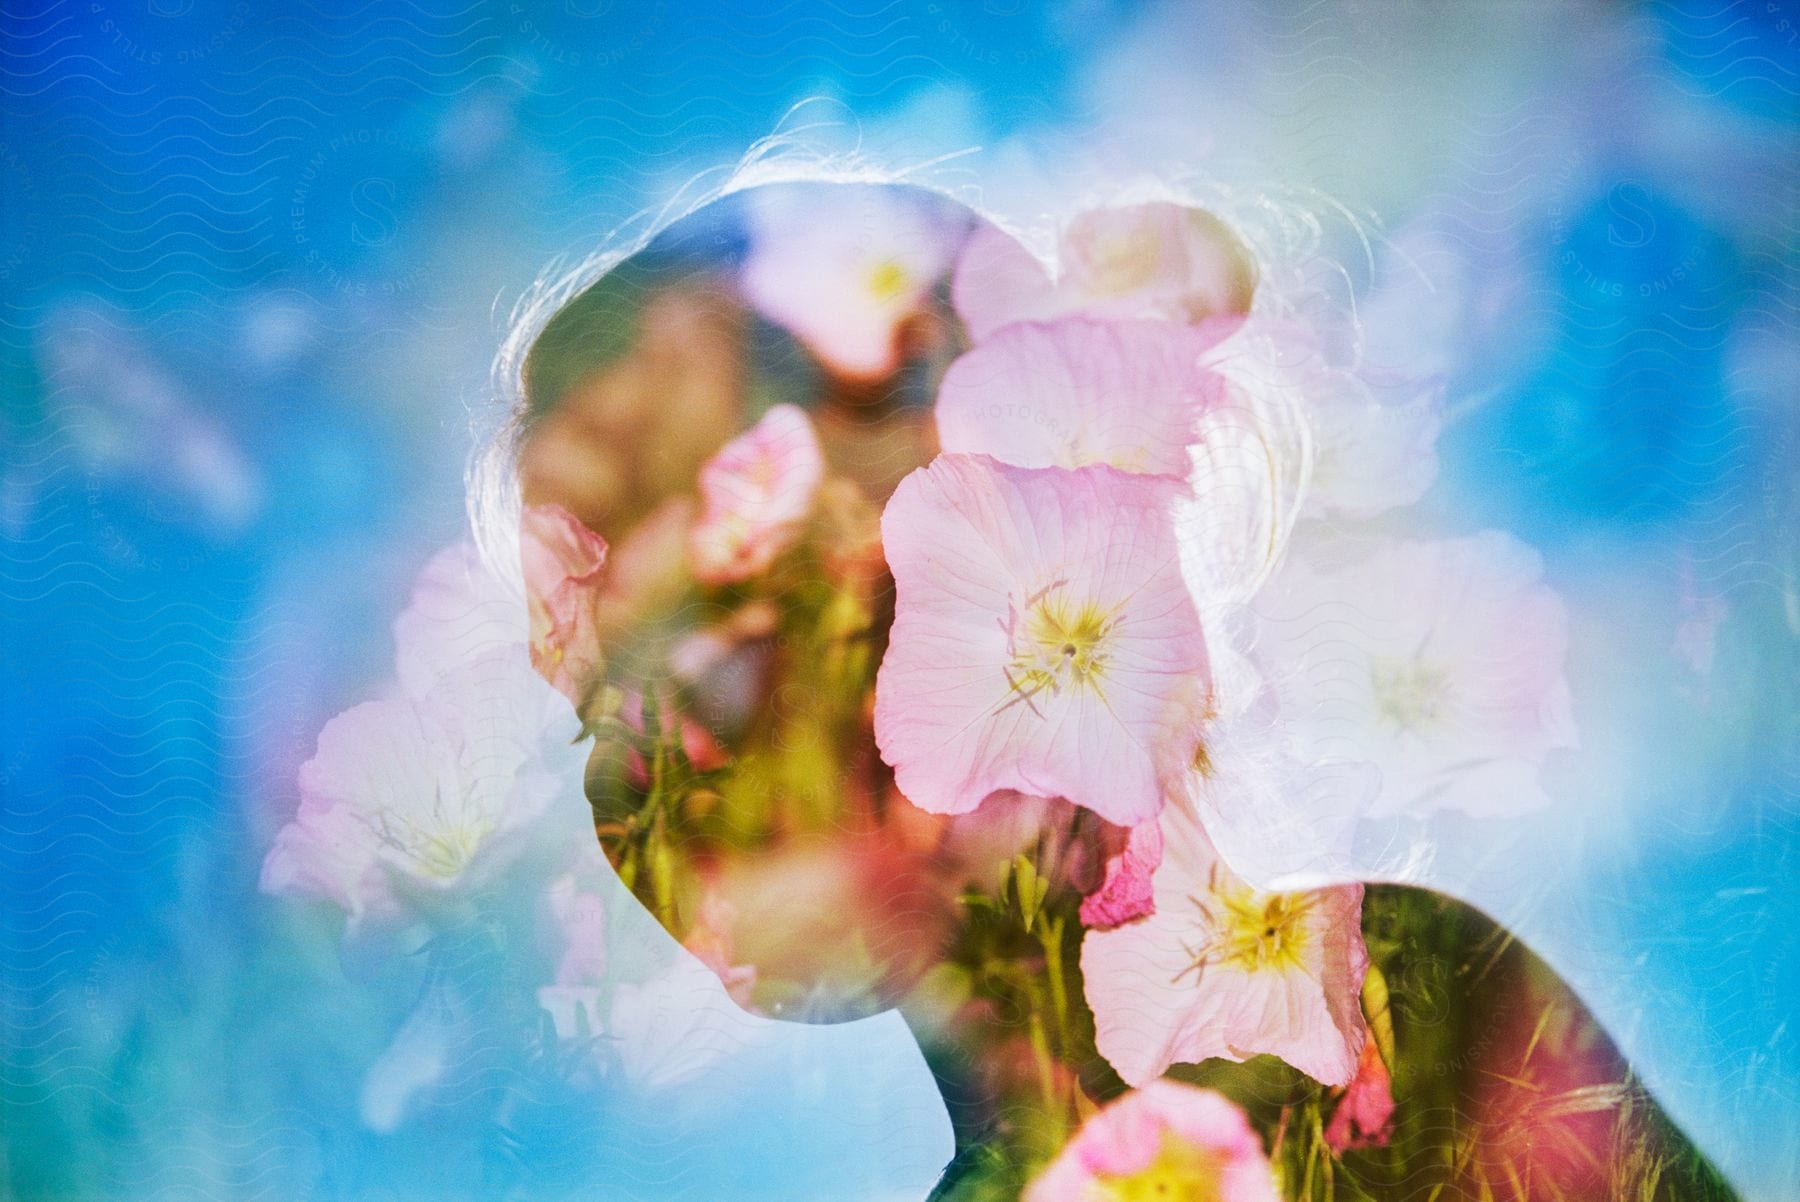 Multi layered exposure of a females face covered in flower petals on a bright sunny day.